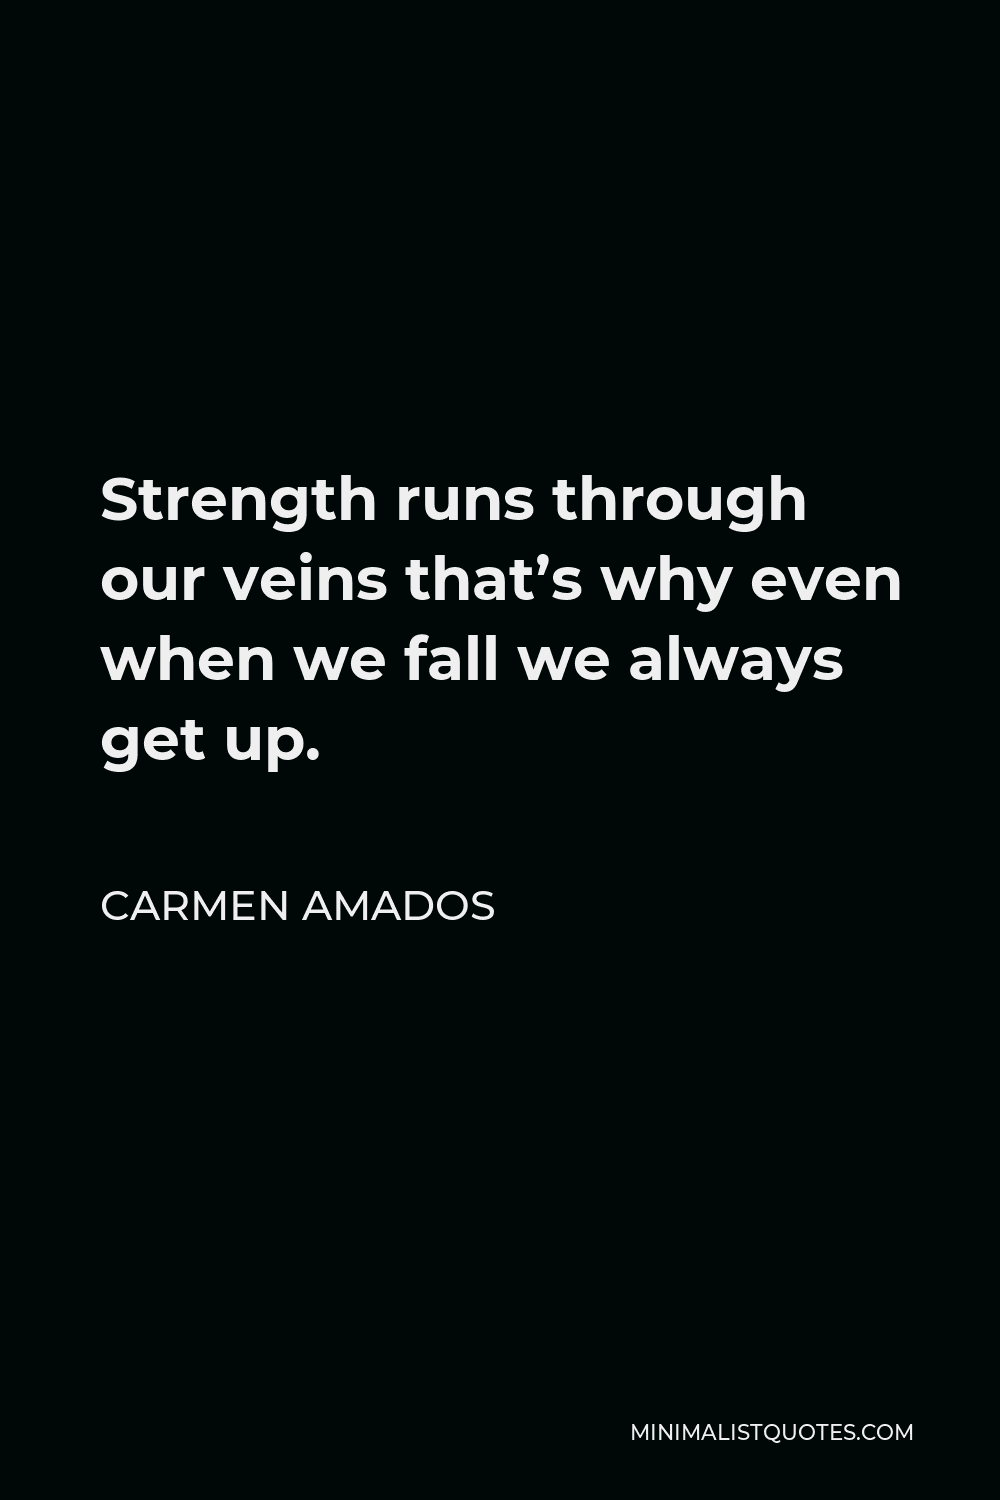 Carmen Amados Quote - Strength runs through our veins that’s why even when we fall we always get up.